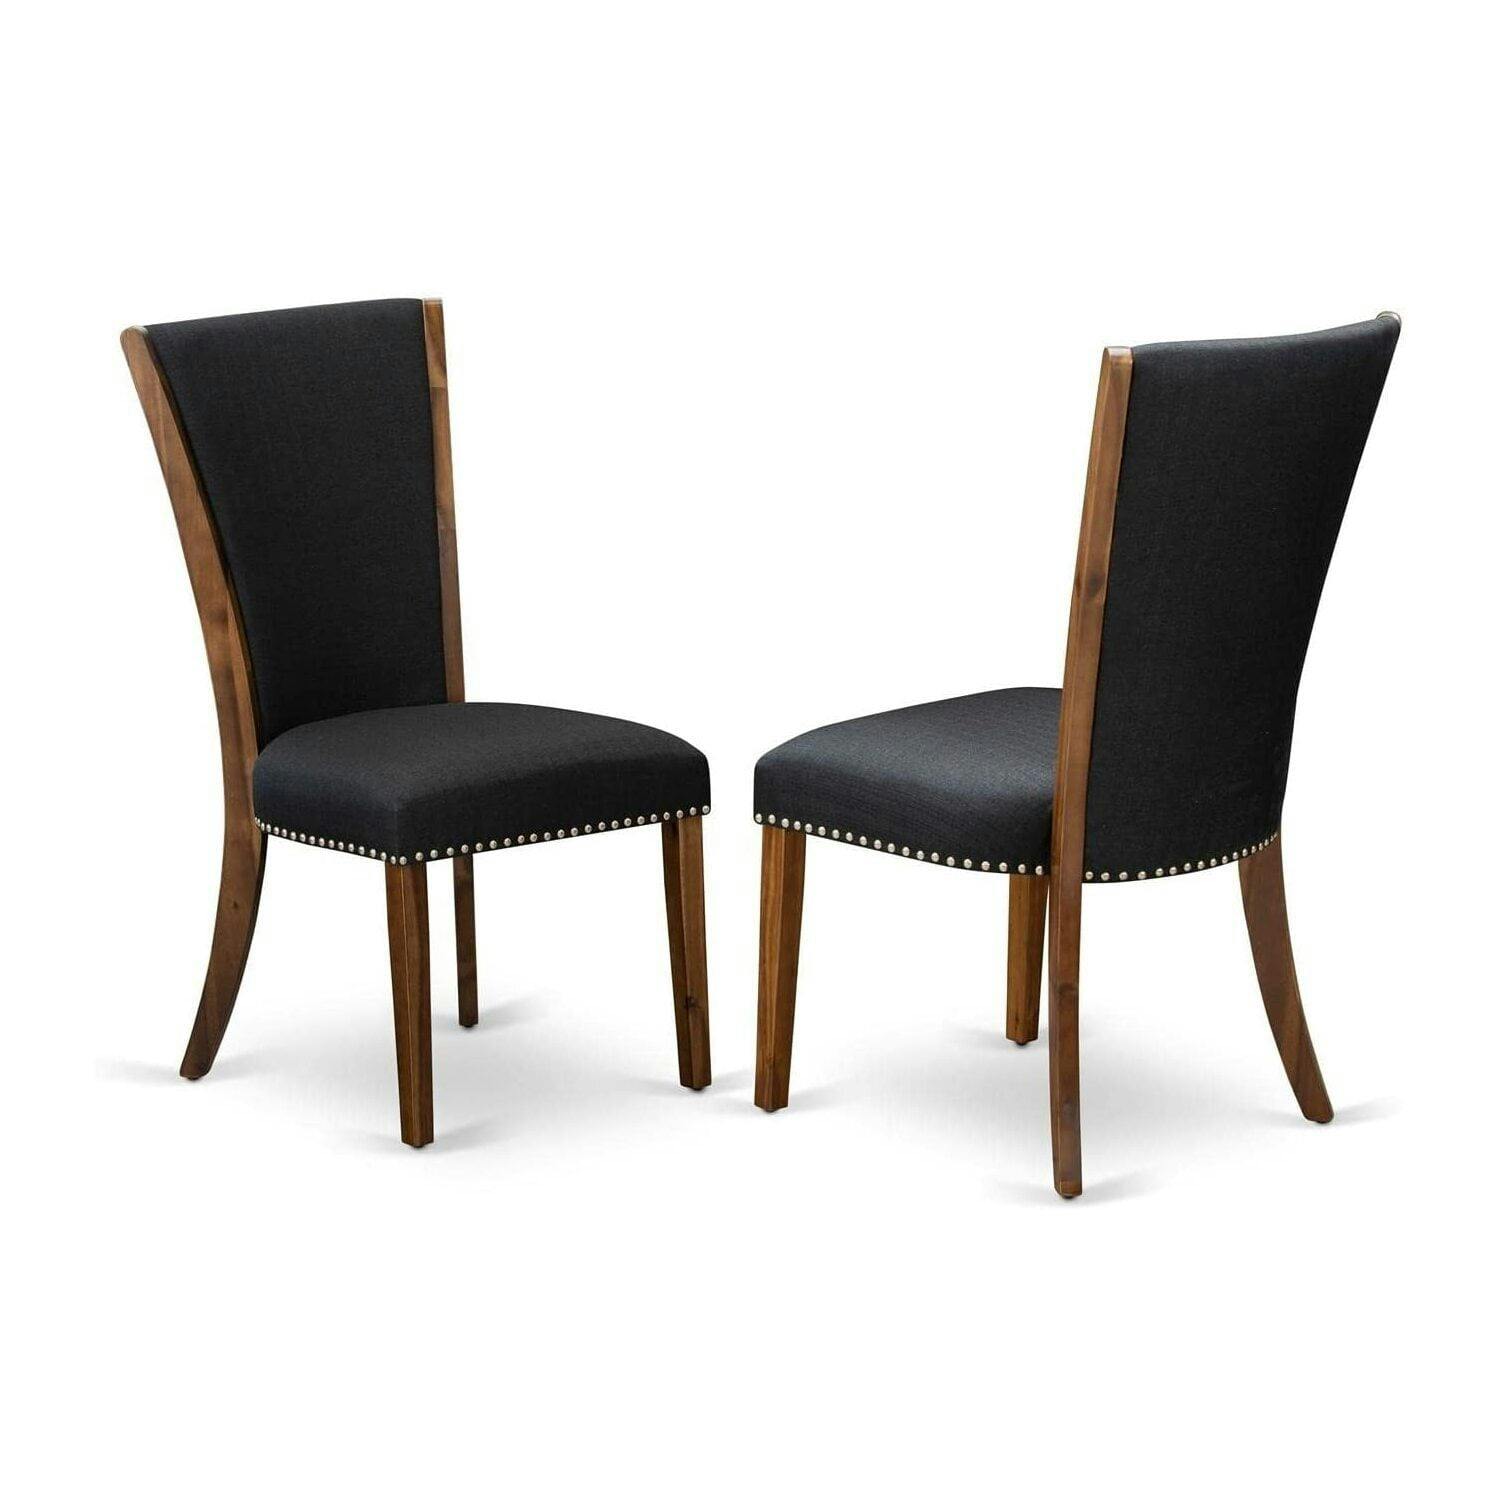 Walnut Wood Parsons Side Chair with Black Linen Upholstery